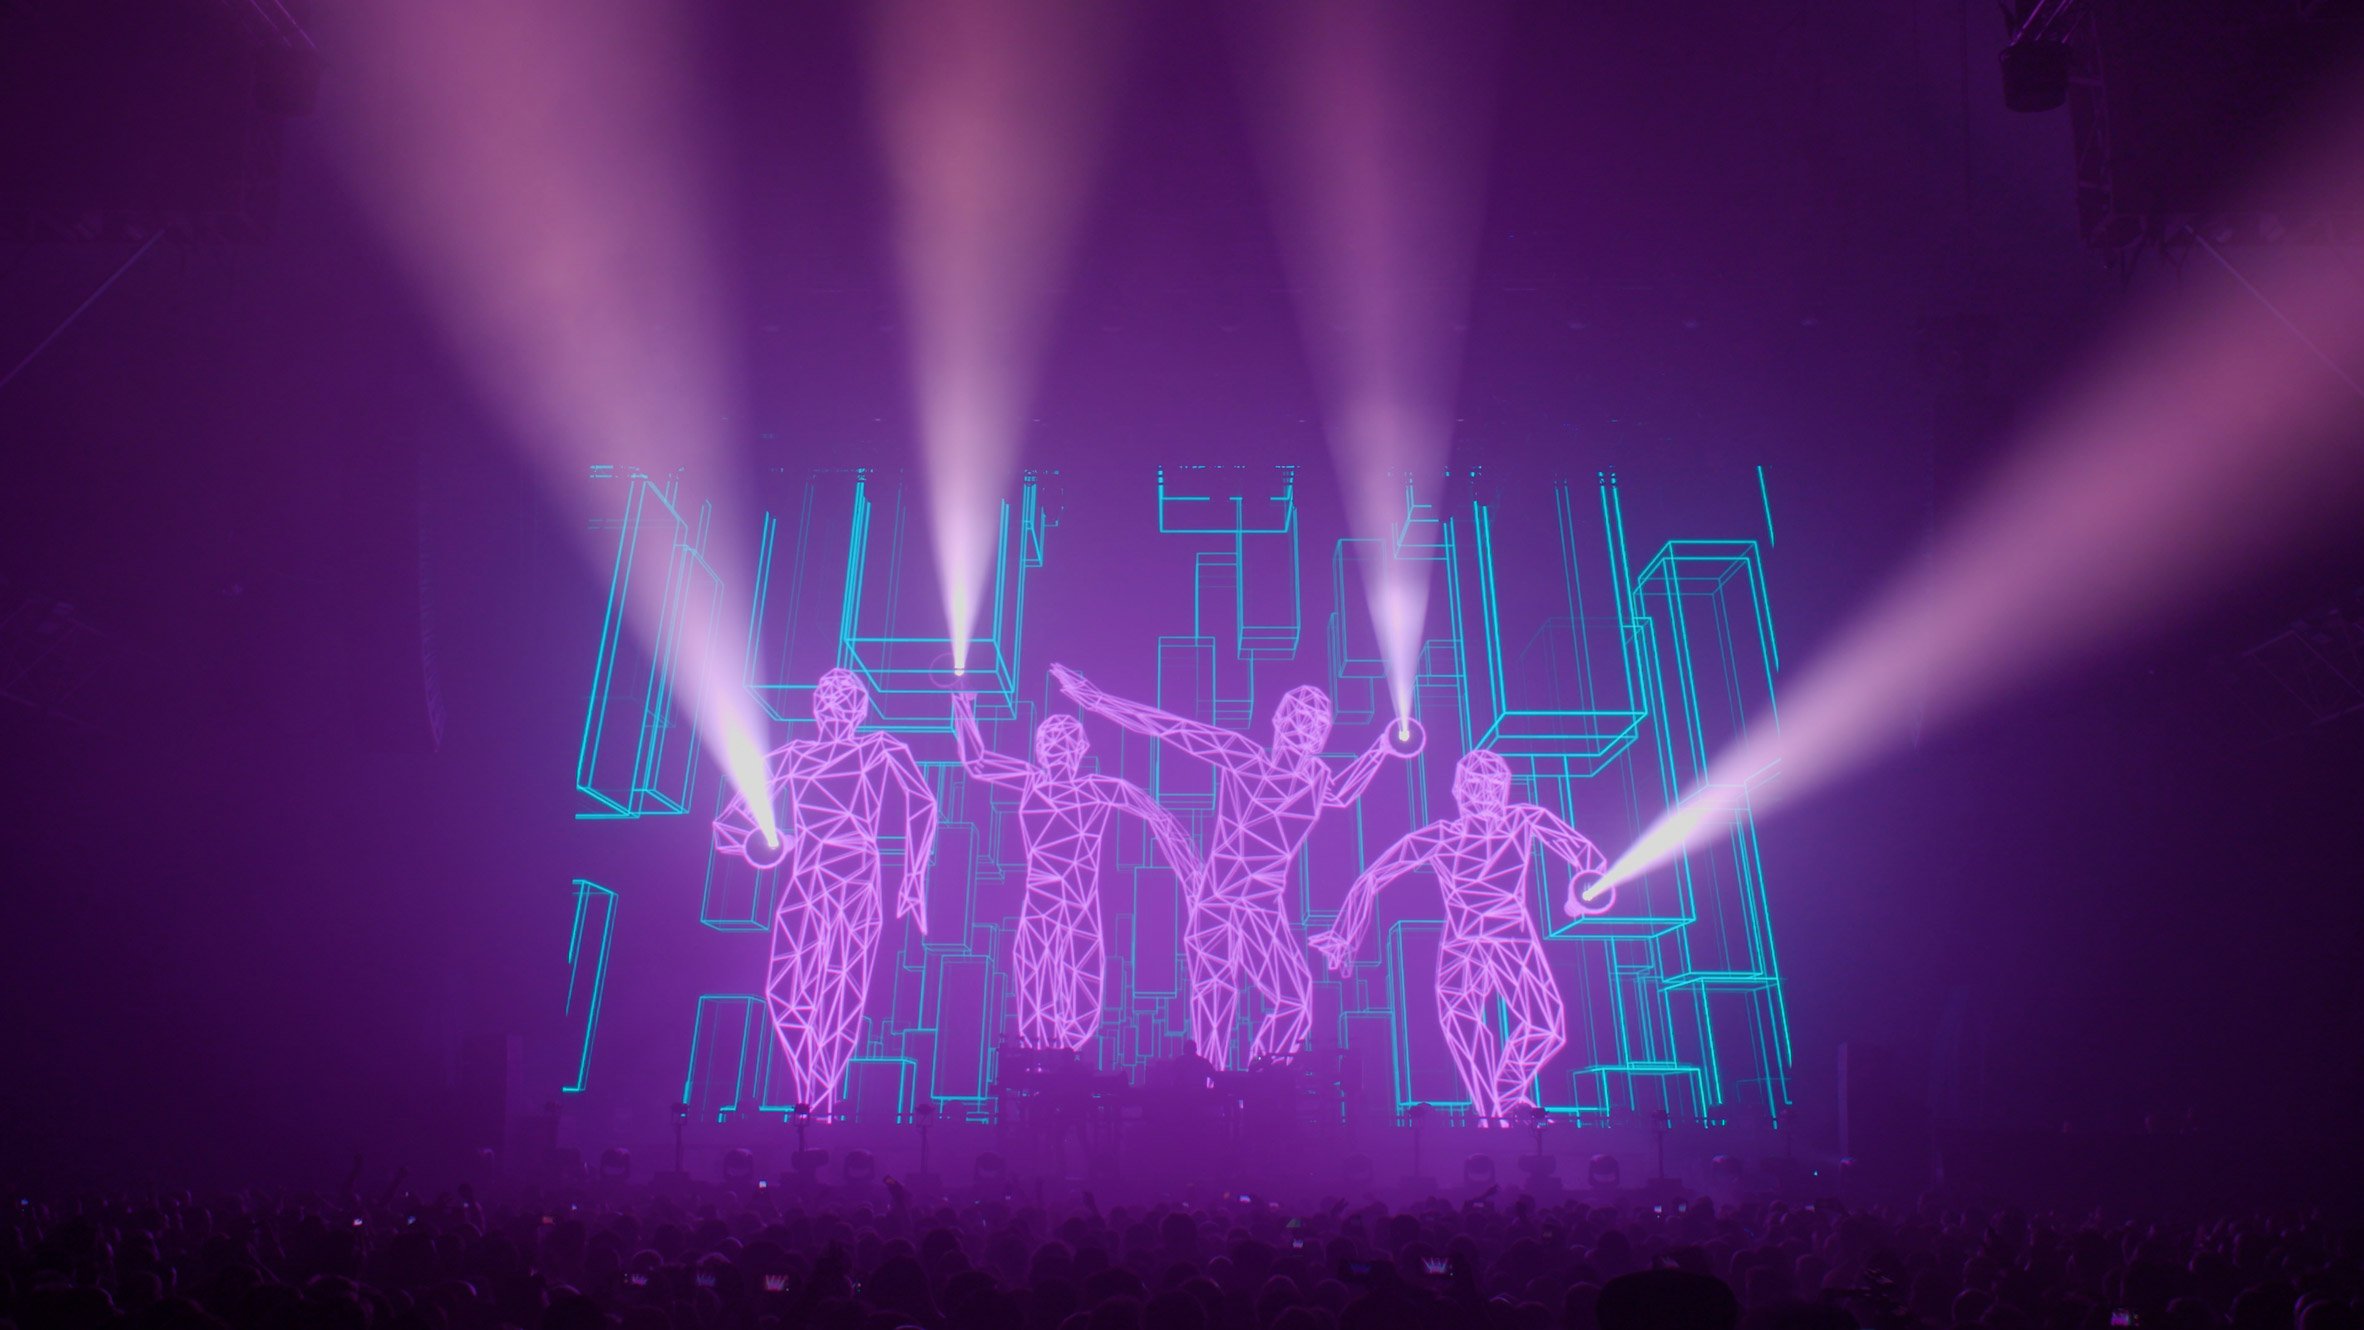 Marcus Lyall and Adam Smith have designed live shows for electronic music duo The Chemical Brothers for over 25 years